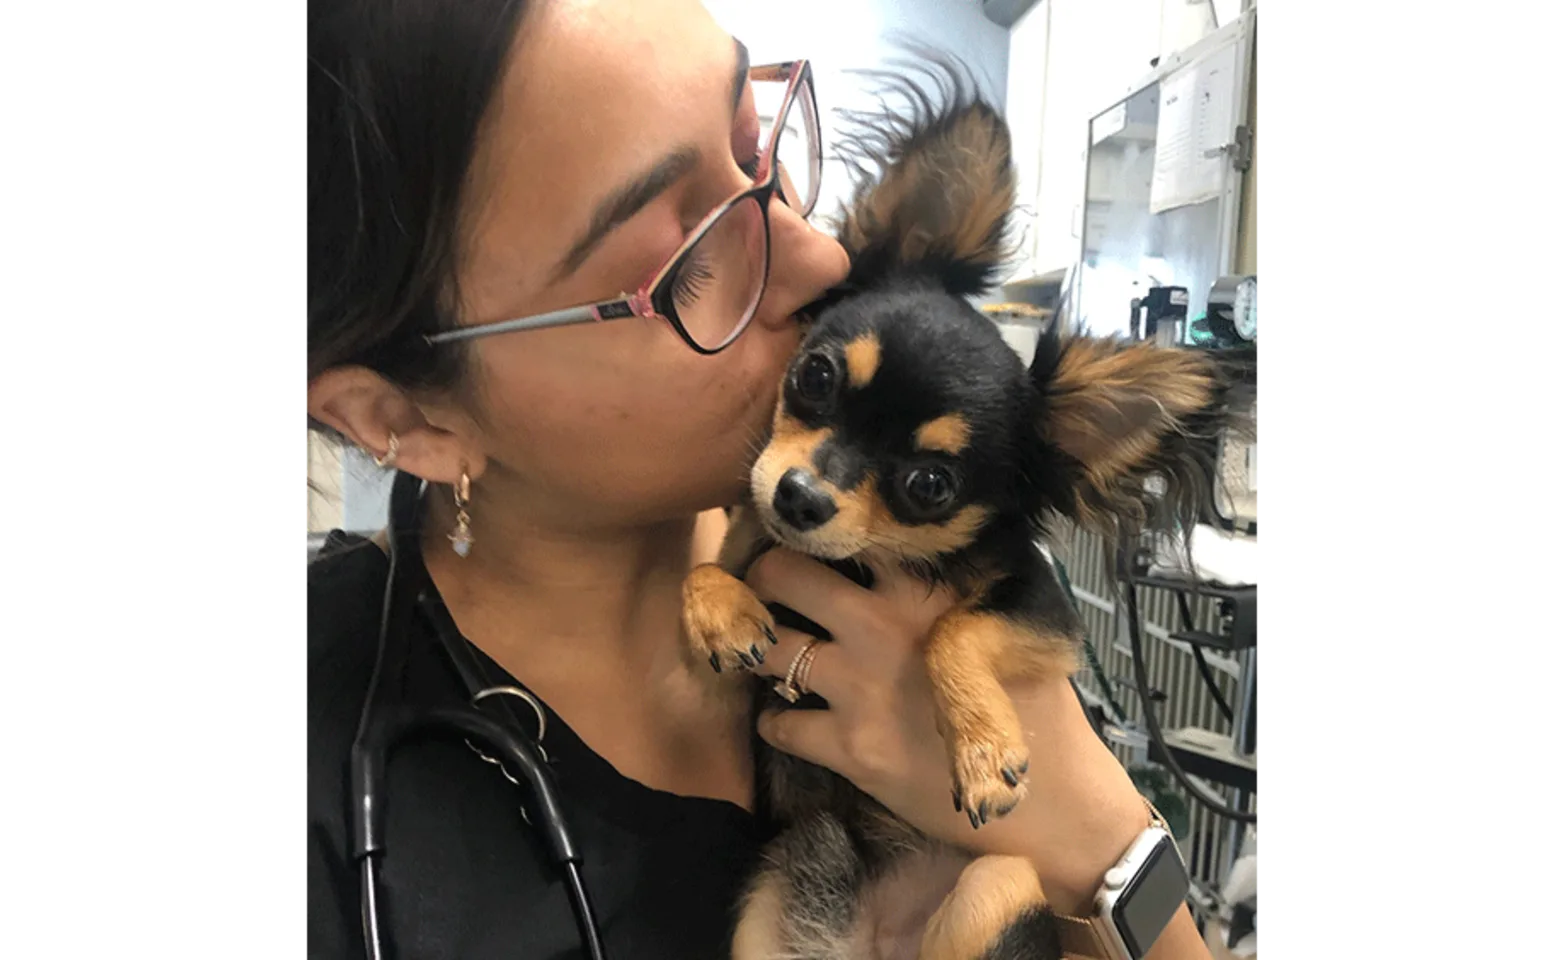 Staff giving a small dog a kiss on their head